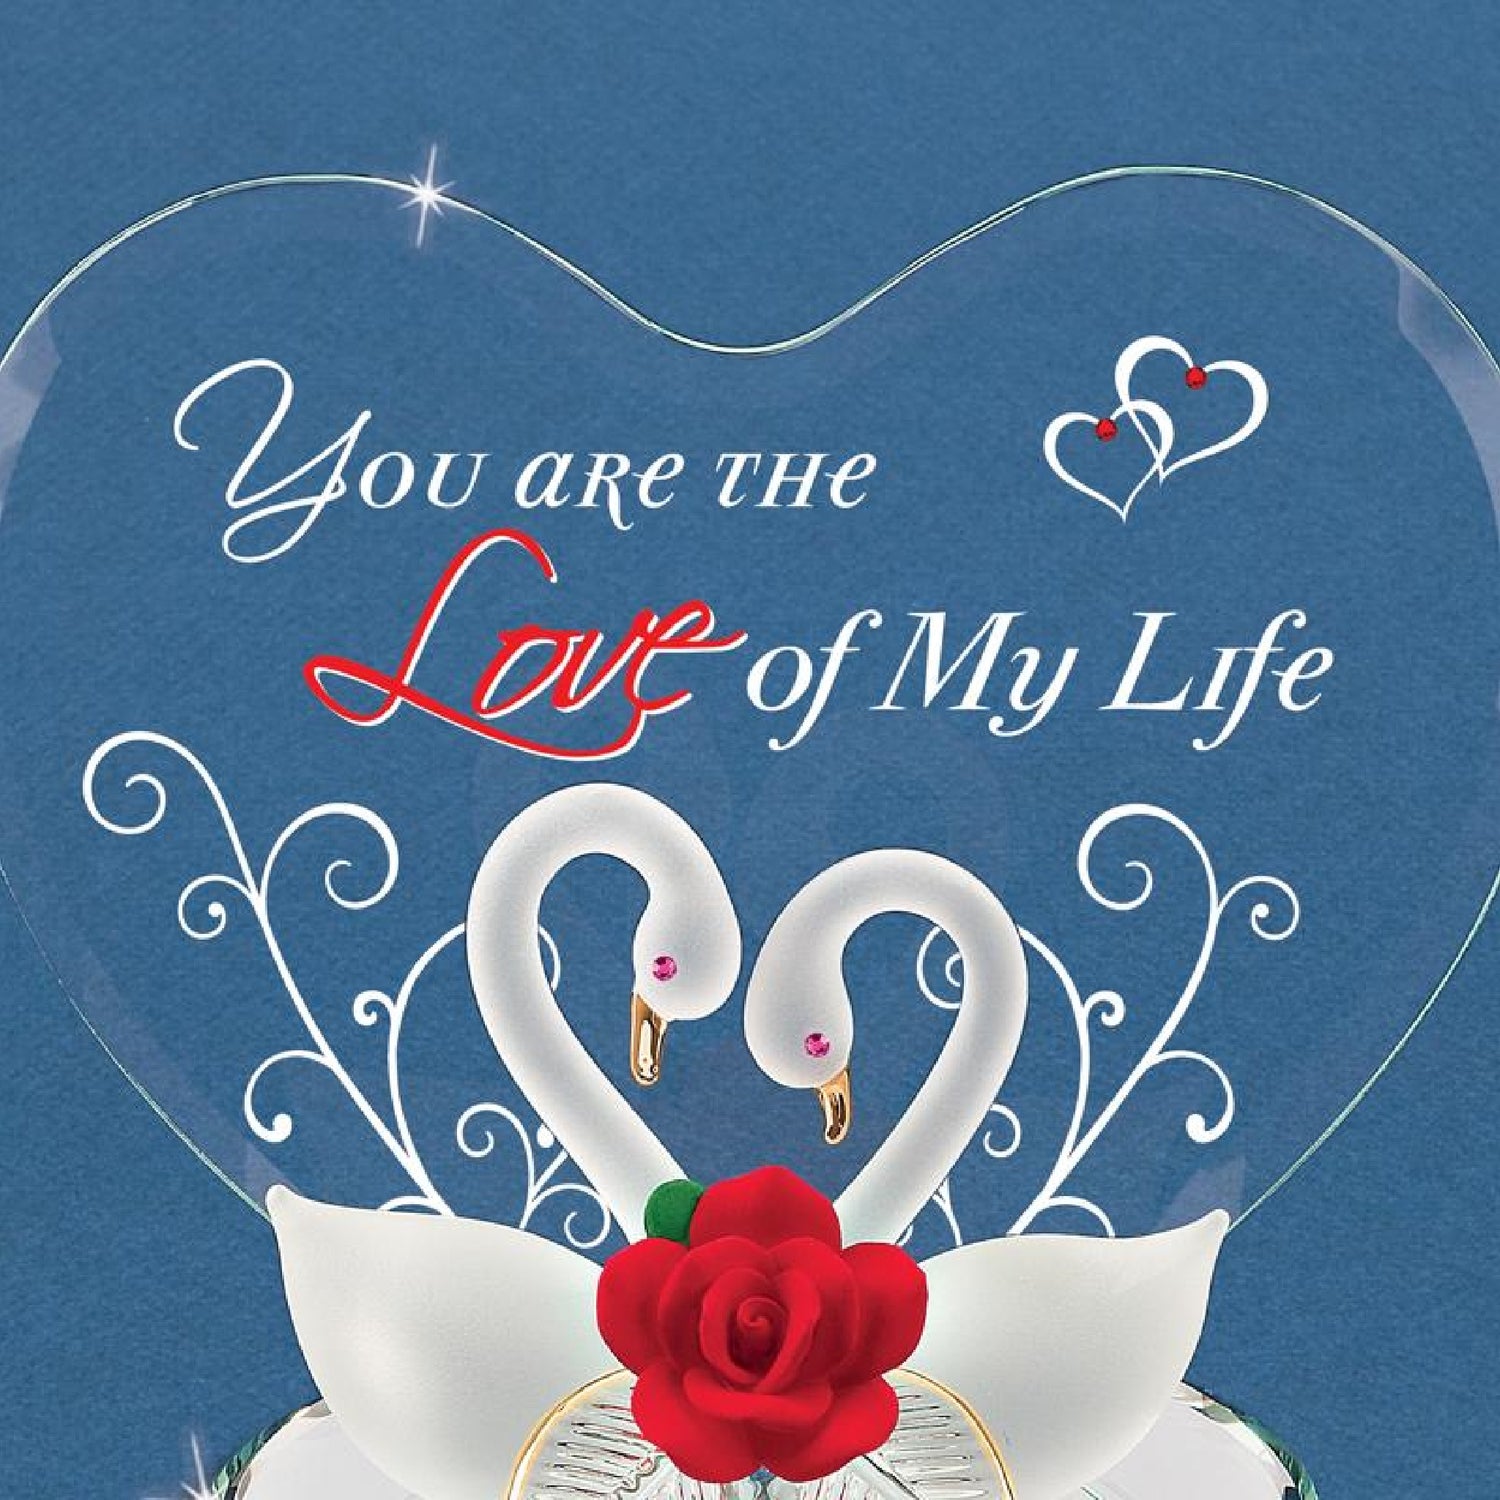 Glass Baron Swans "Love Of My Life" Plaque